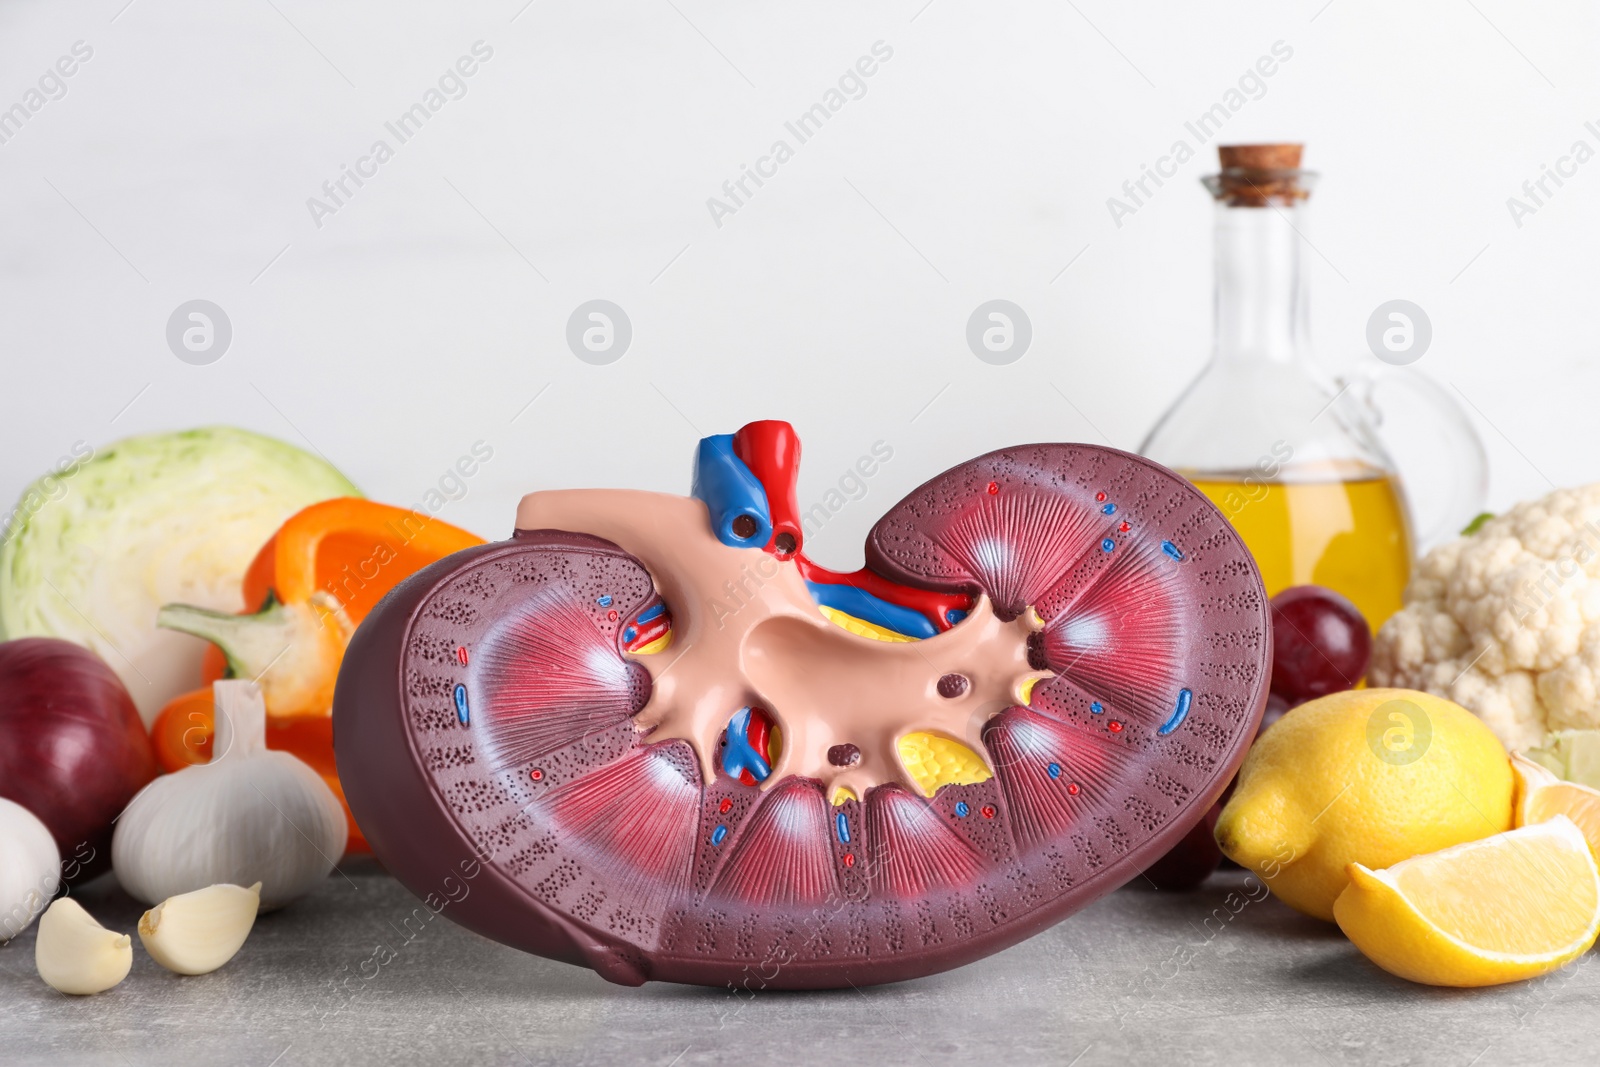 Photo of Composition with kidney model and different products on grey table against white background